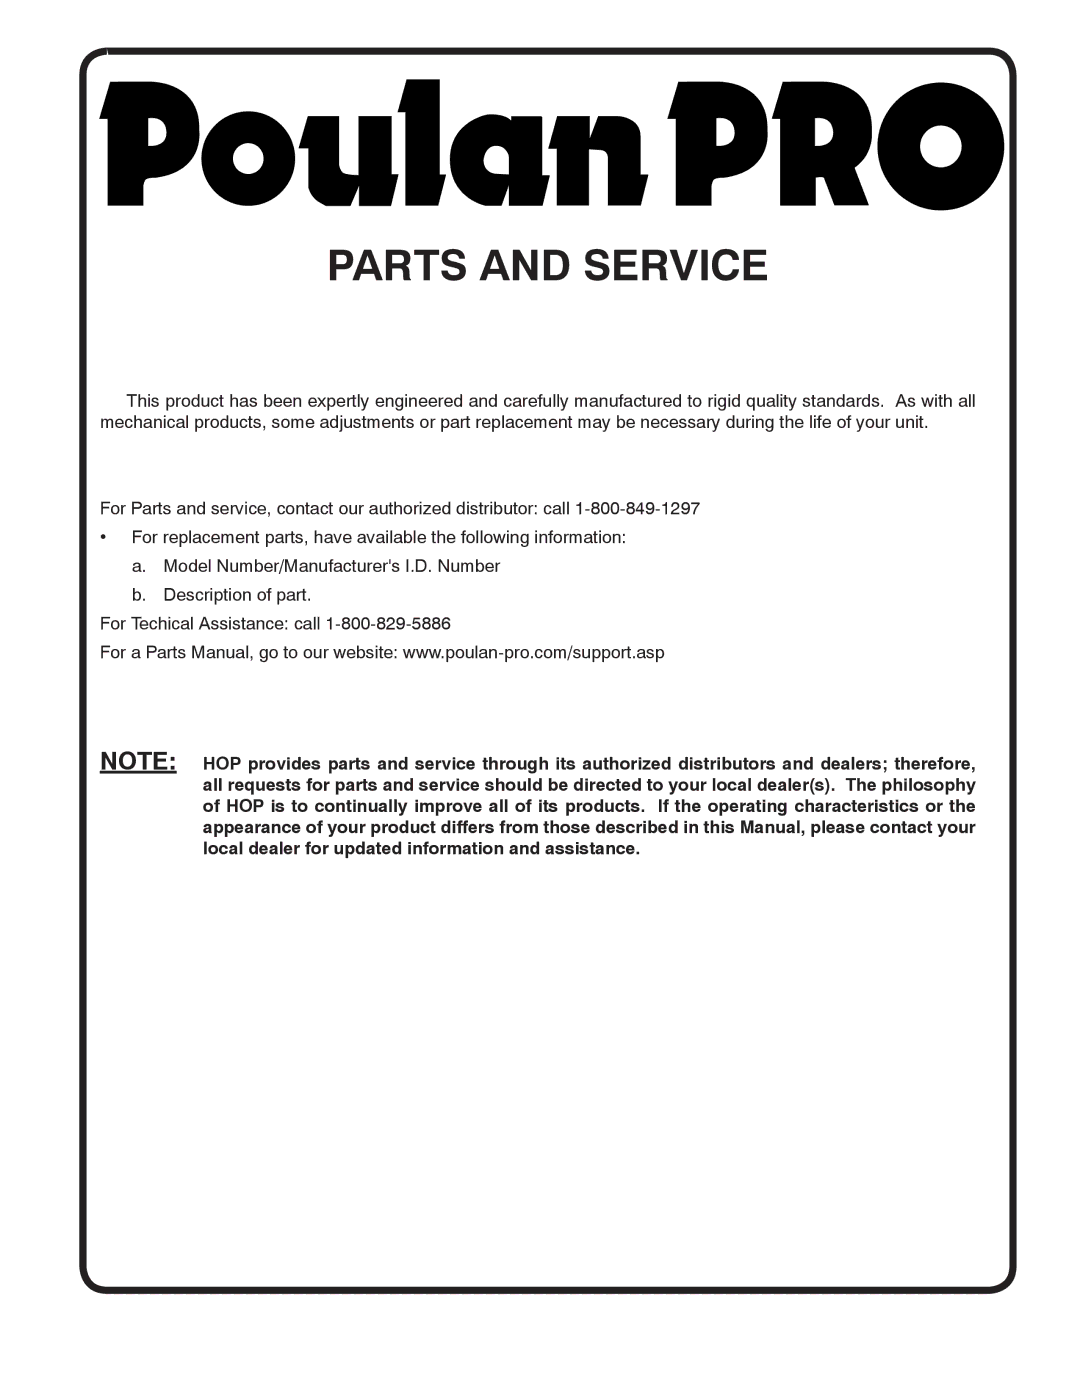 Poulan 411259 manual Parts and Service 